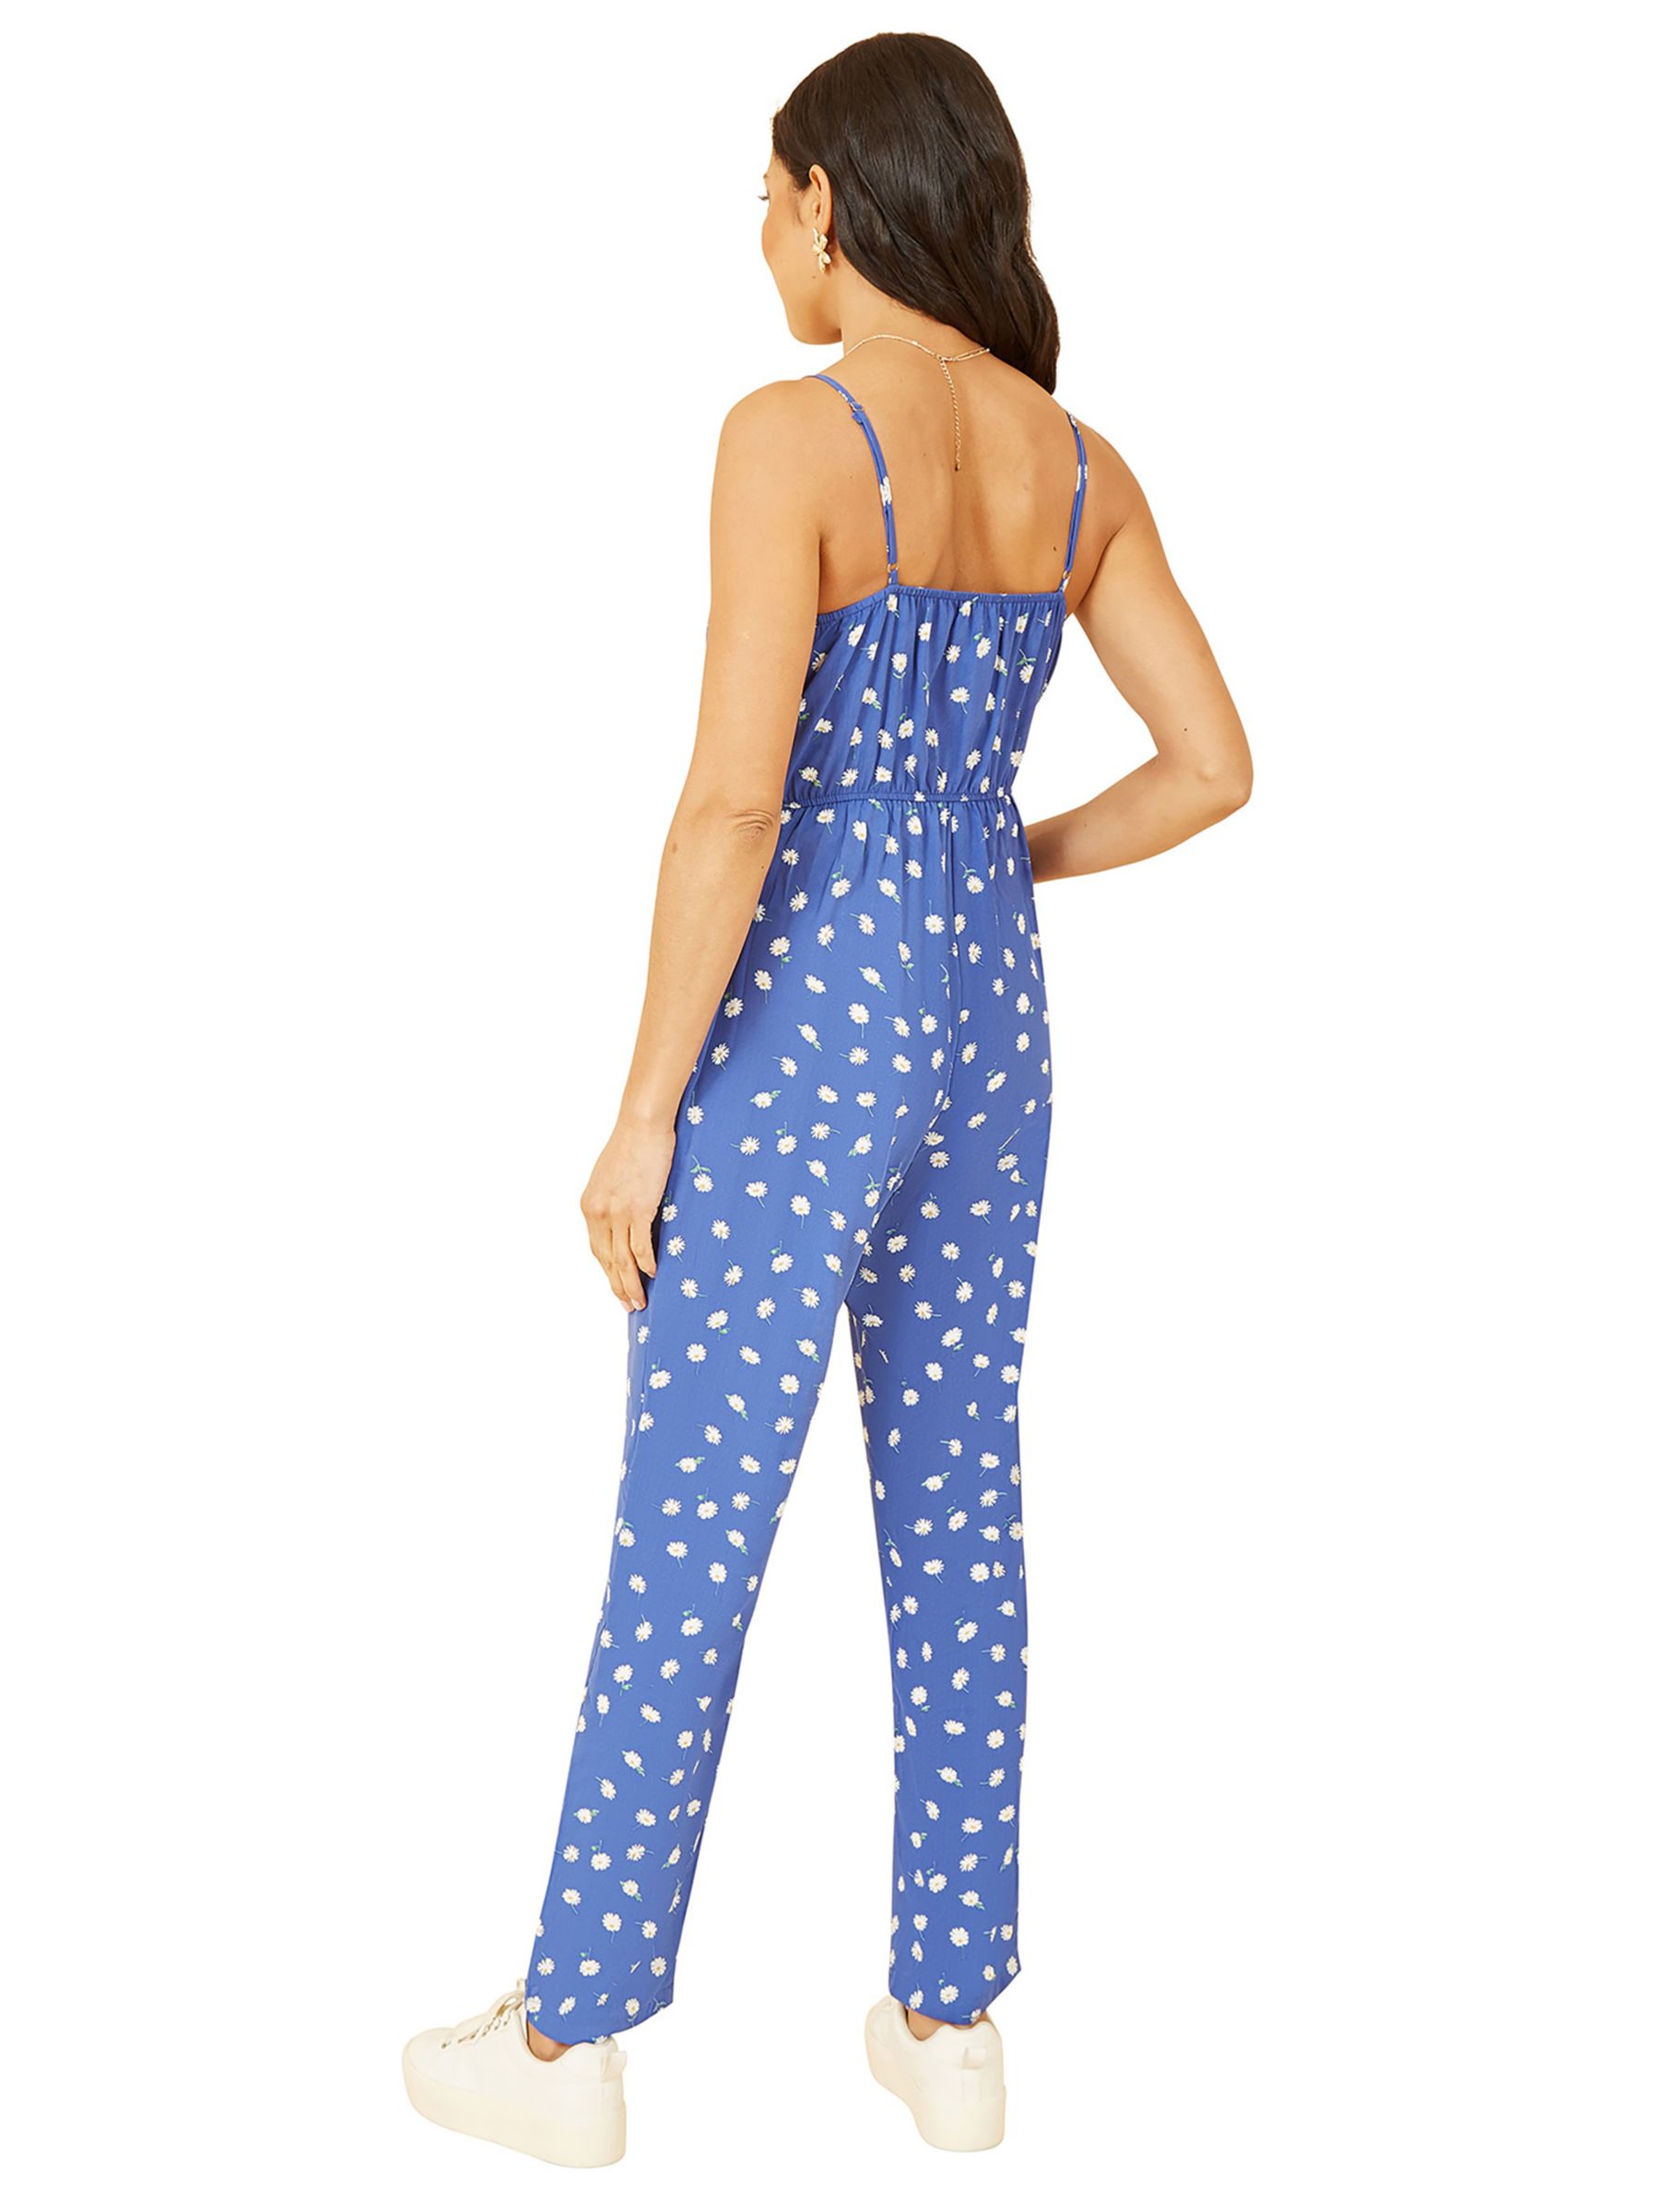 Buy Yumi Daisy Print Strappy Jumpsuit, Blue Online at johnlewis.com